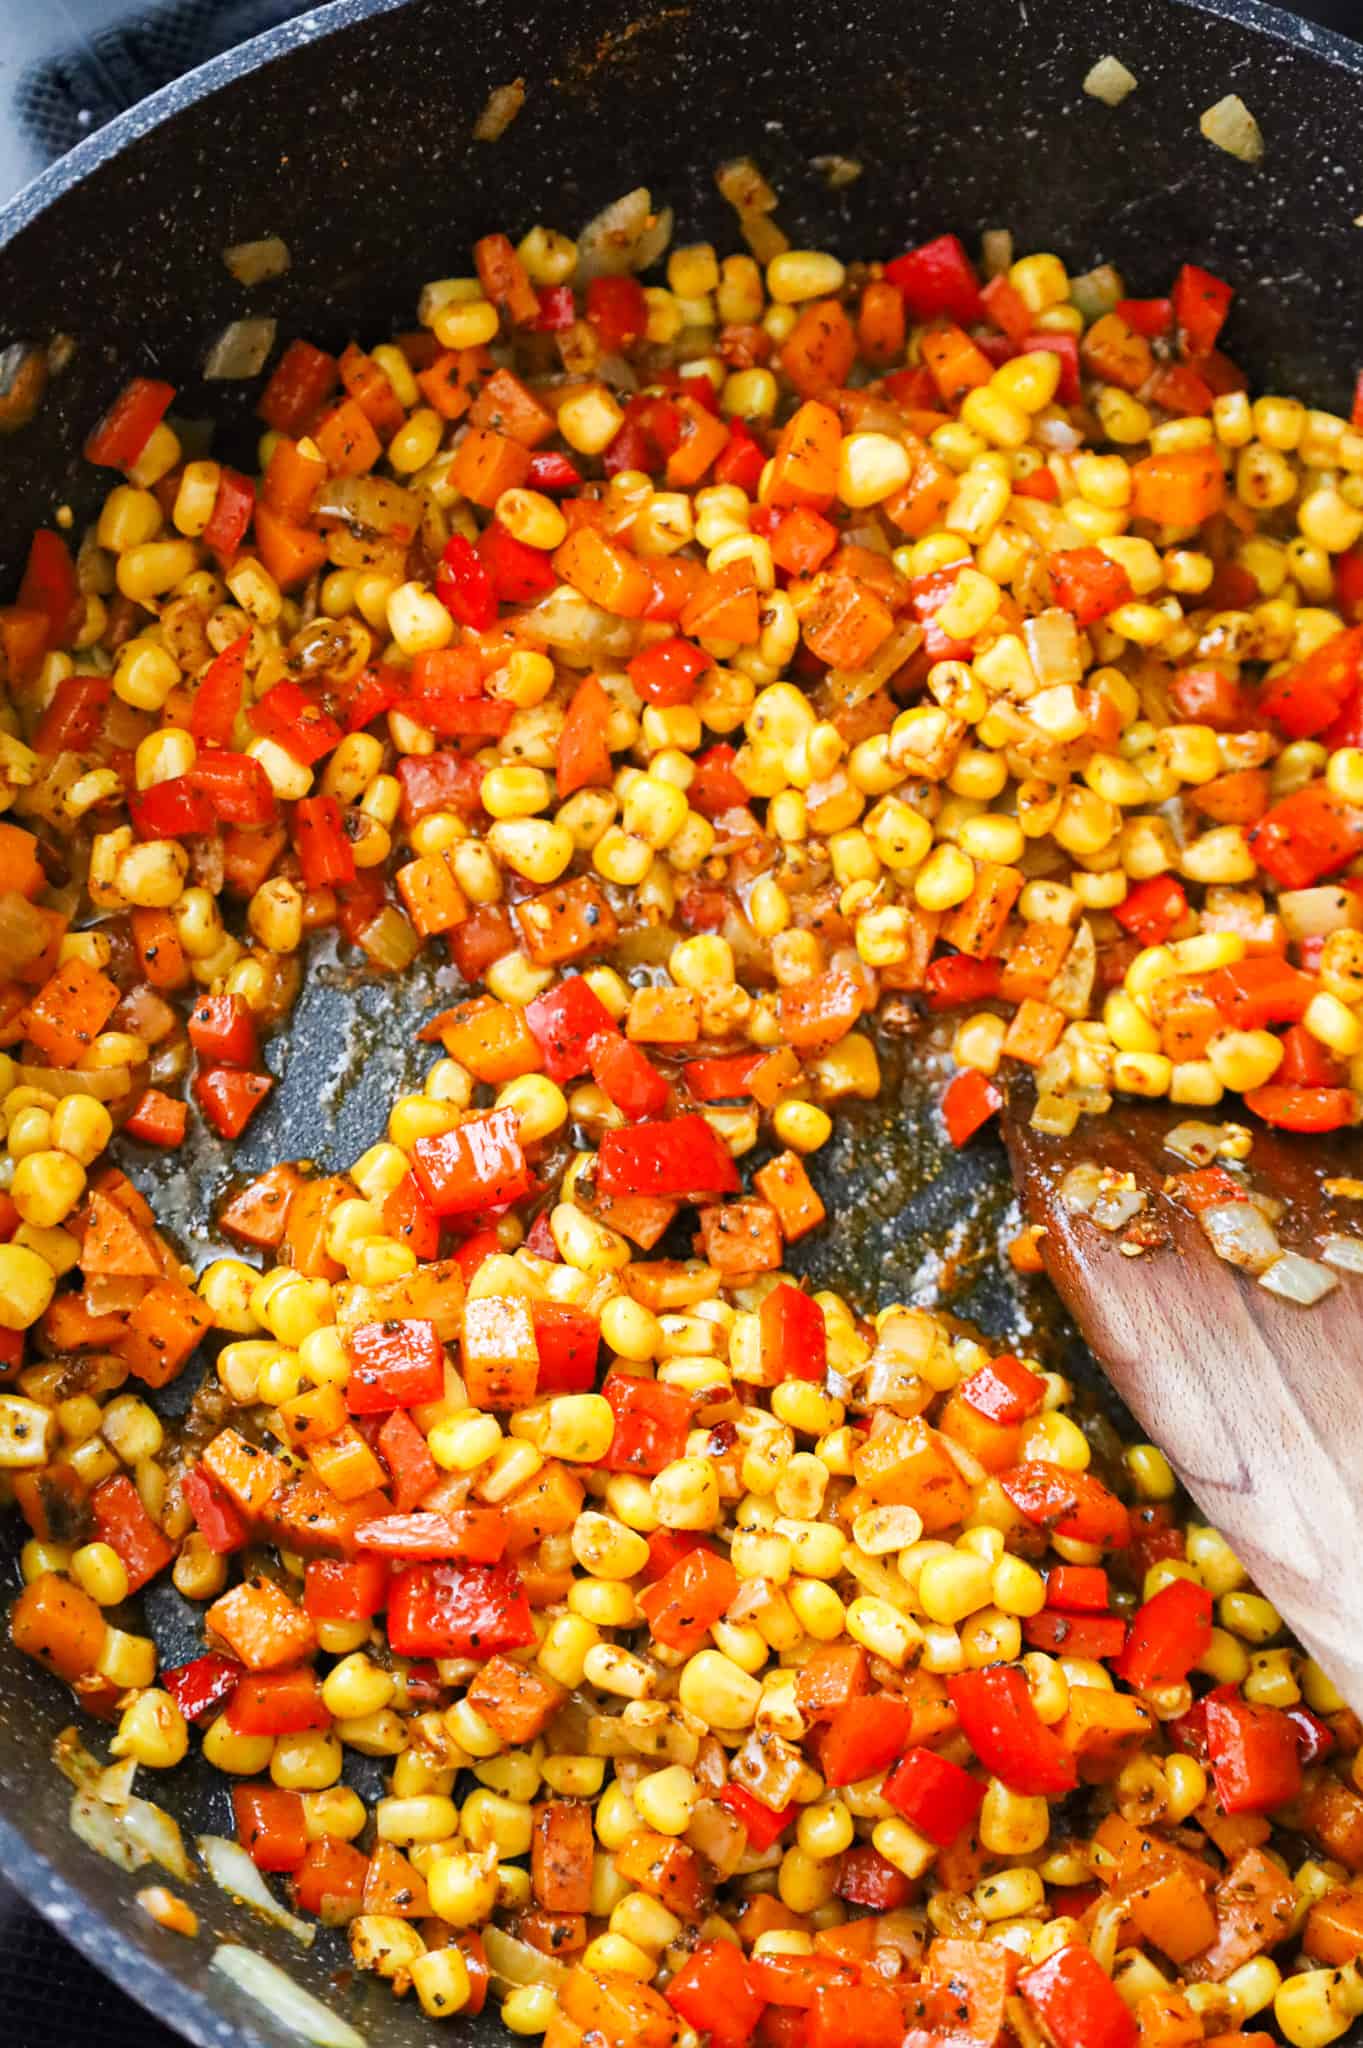 Cajun seasoned corn, diced peppers and diced sweet potatoes in a skillet